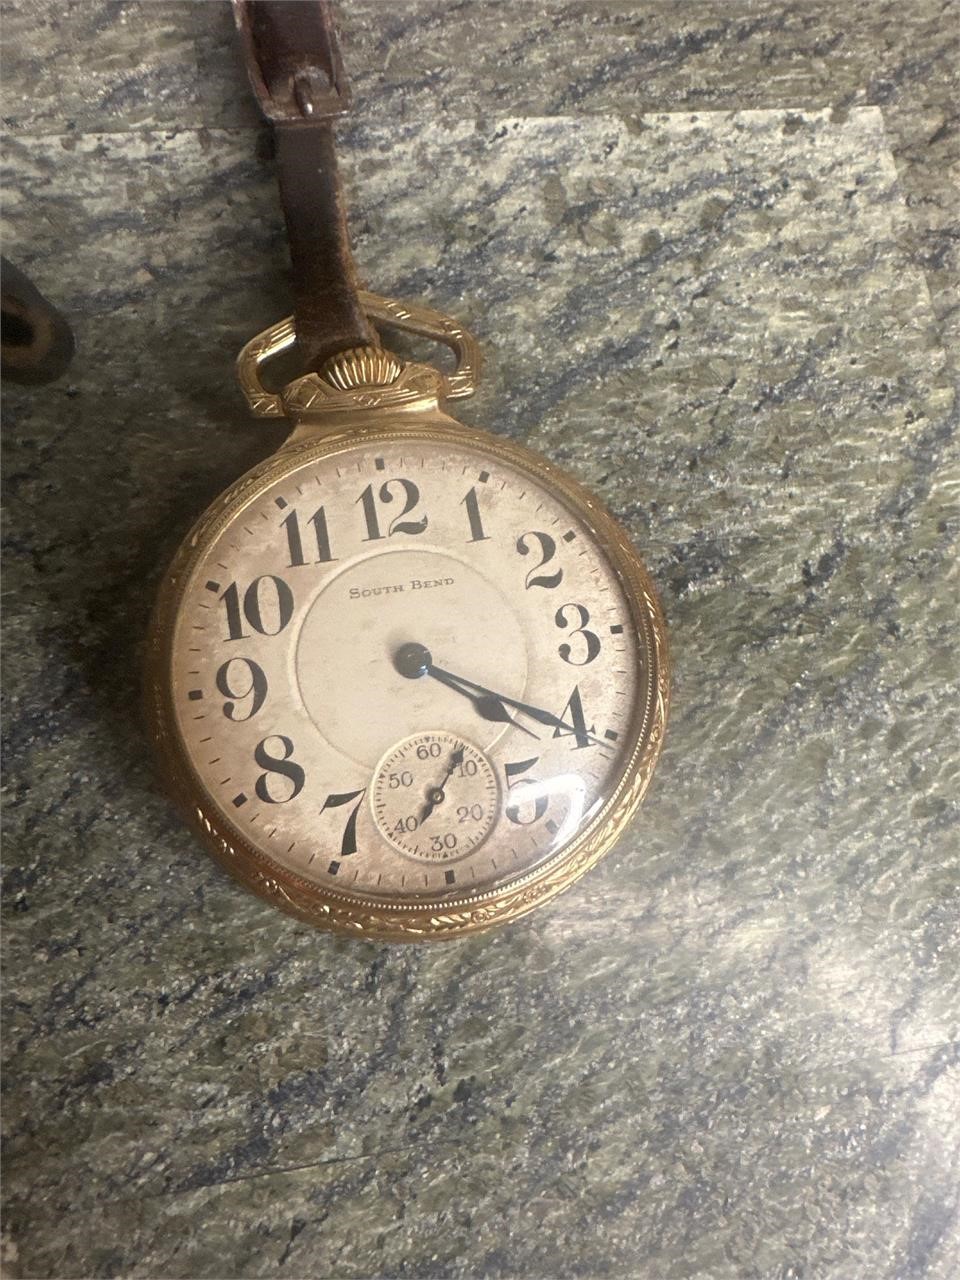 SOUTH BEND 21 JEWELS POCKET WATCH WORKING